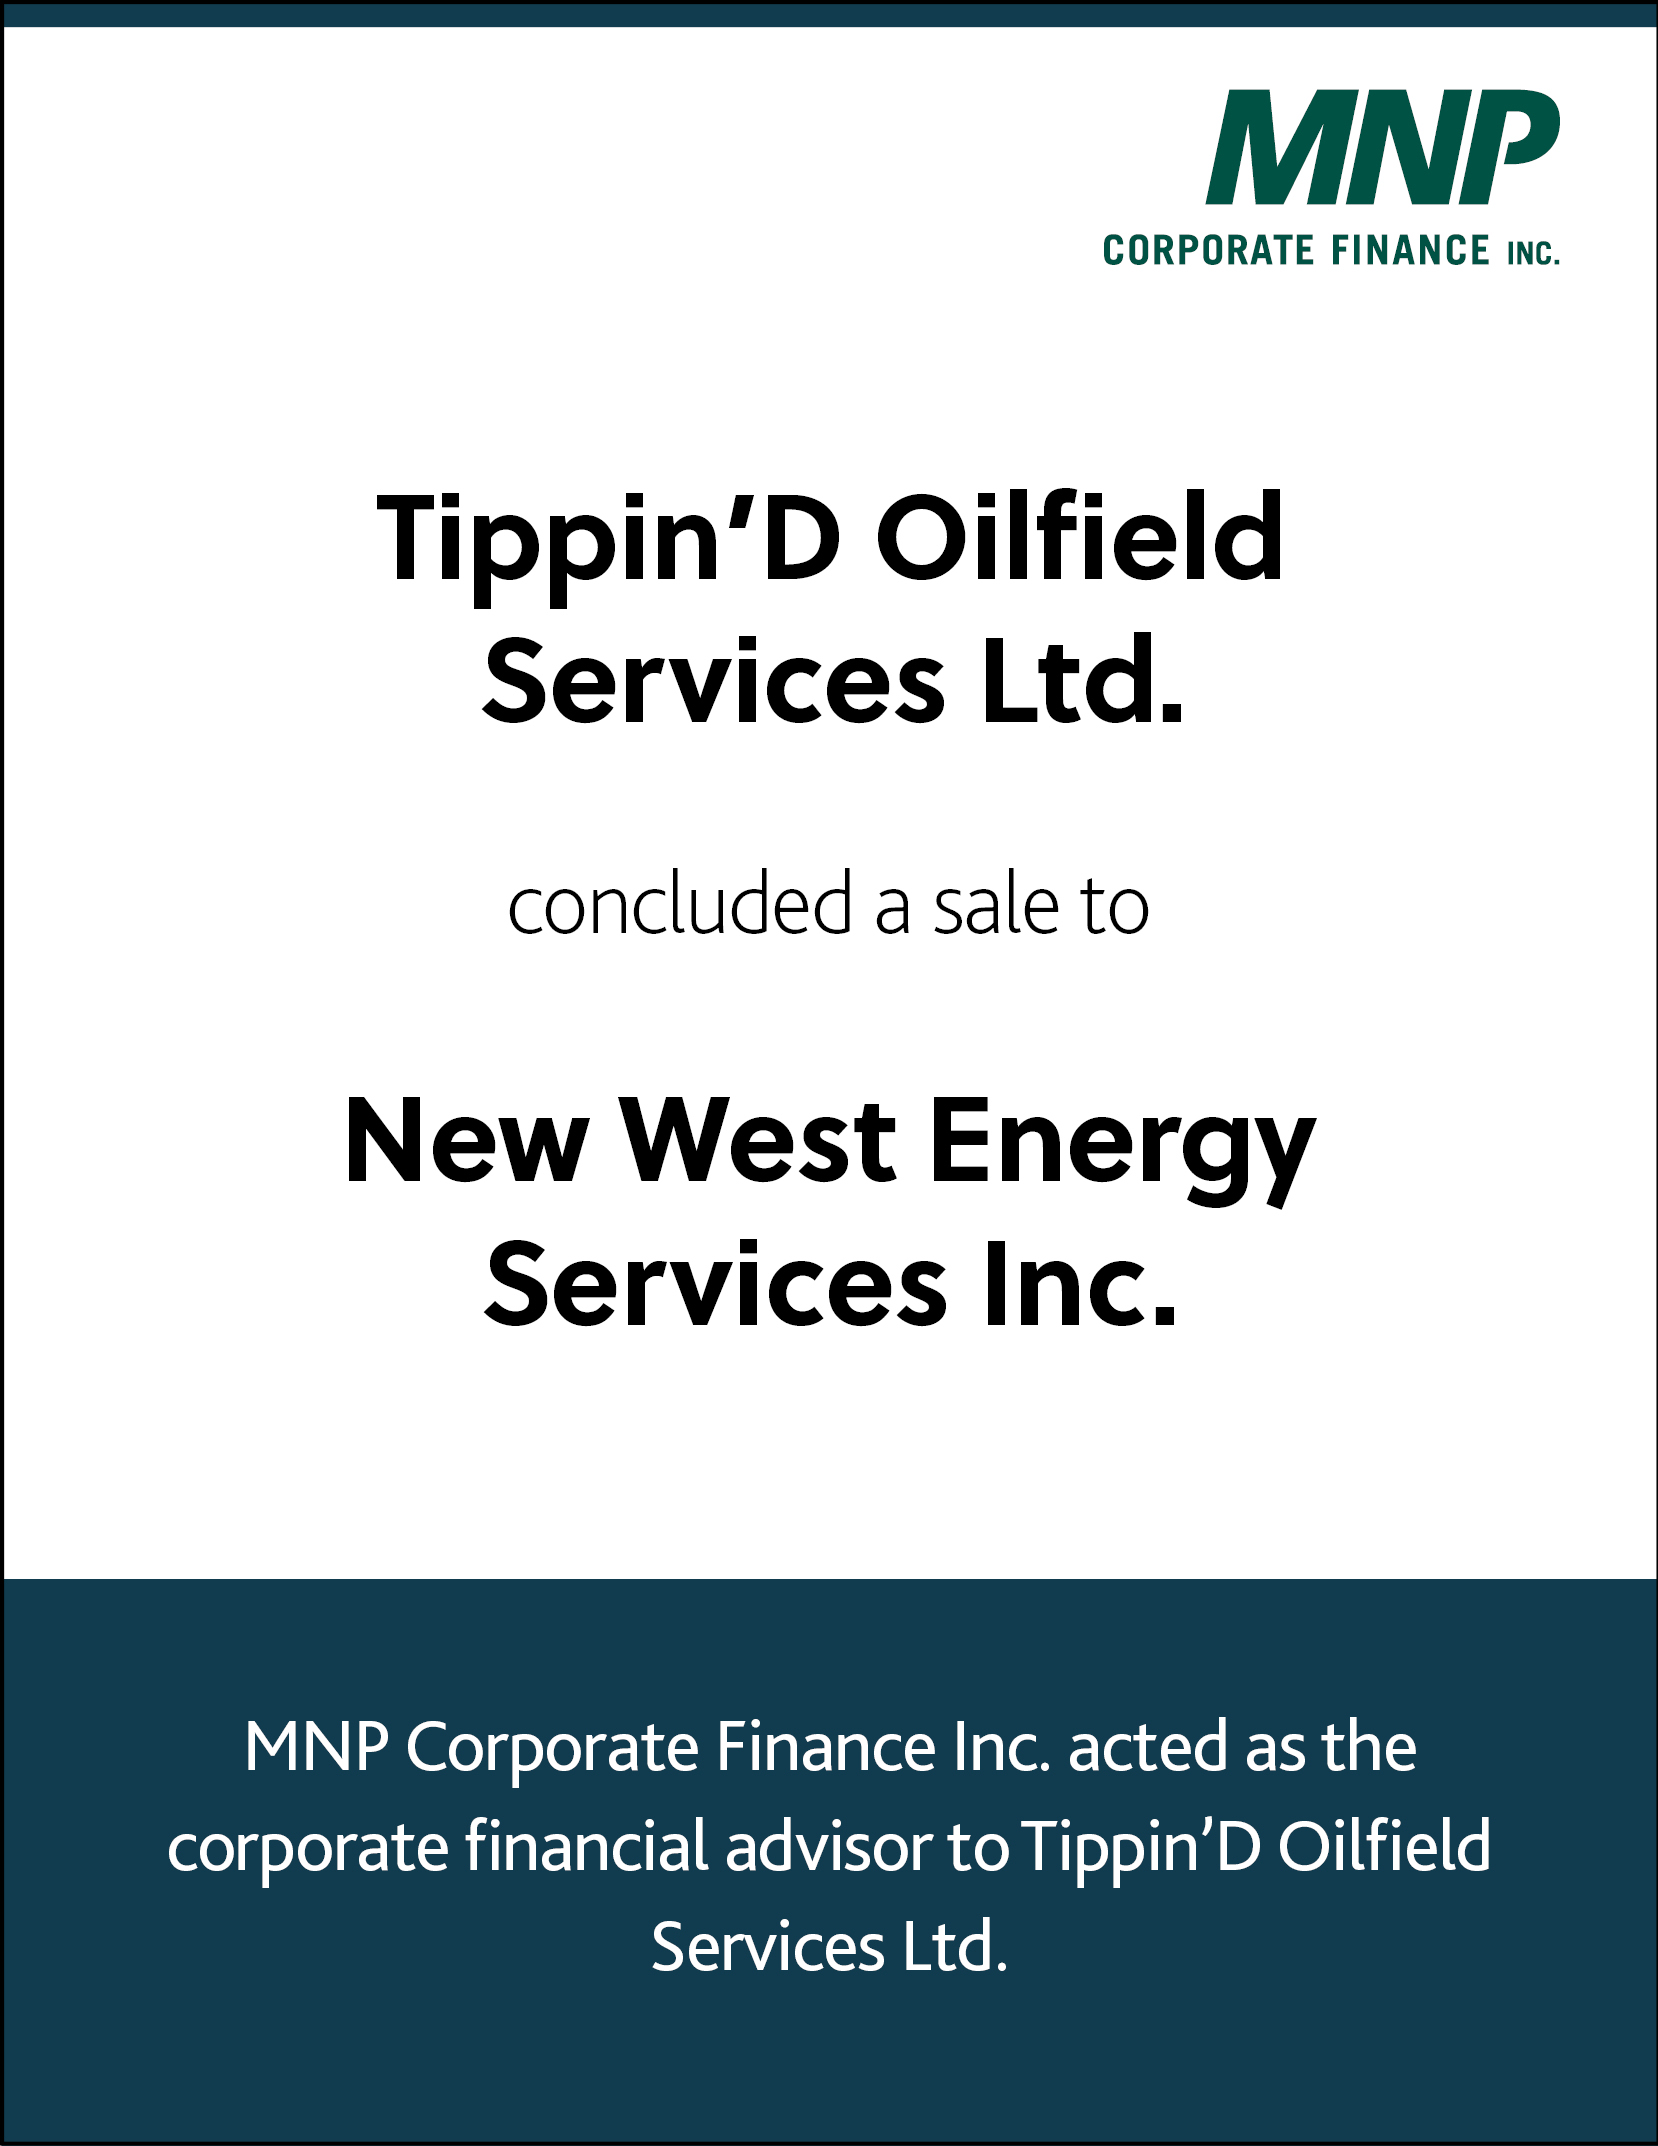 Tippin'D Oilfield Services Ltd concluded a sale to New West Energy Services Inc.